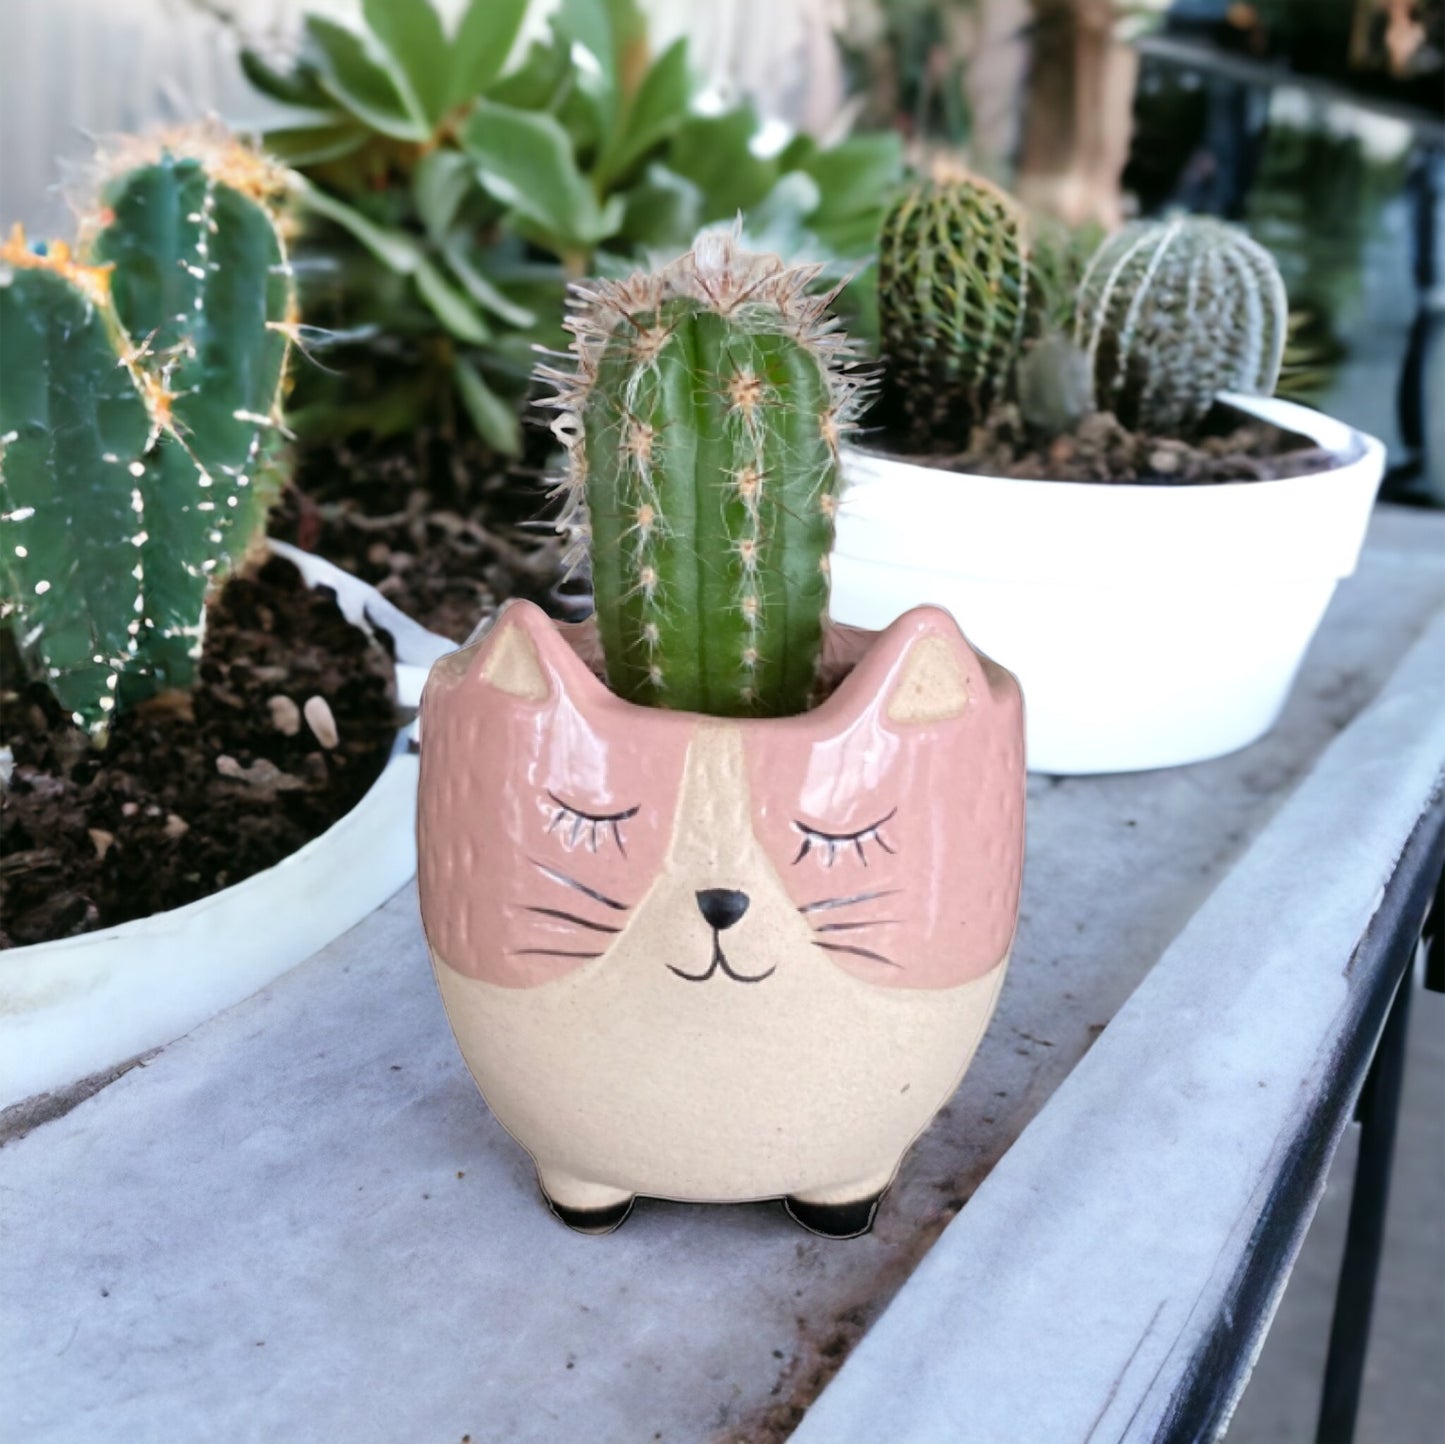 Plant Pot Planter Pink Kitty Cat - The Renmy Store Homewares & Gifts 